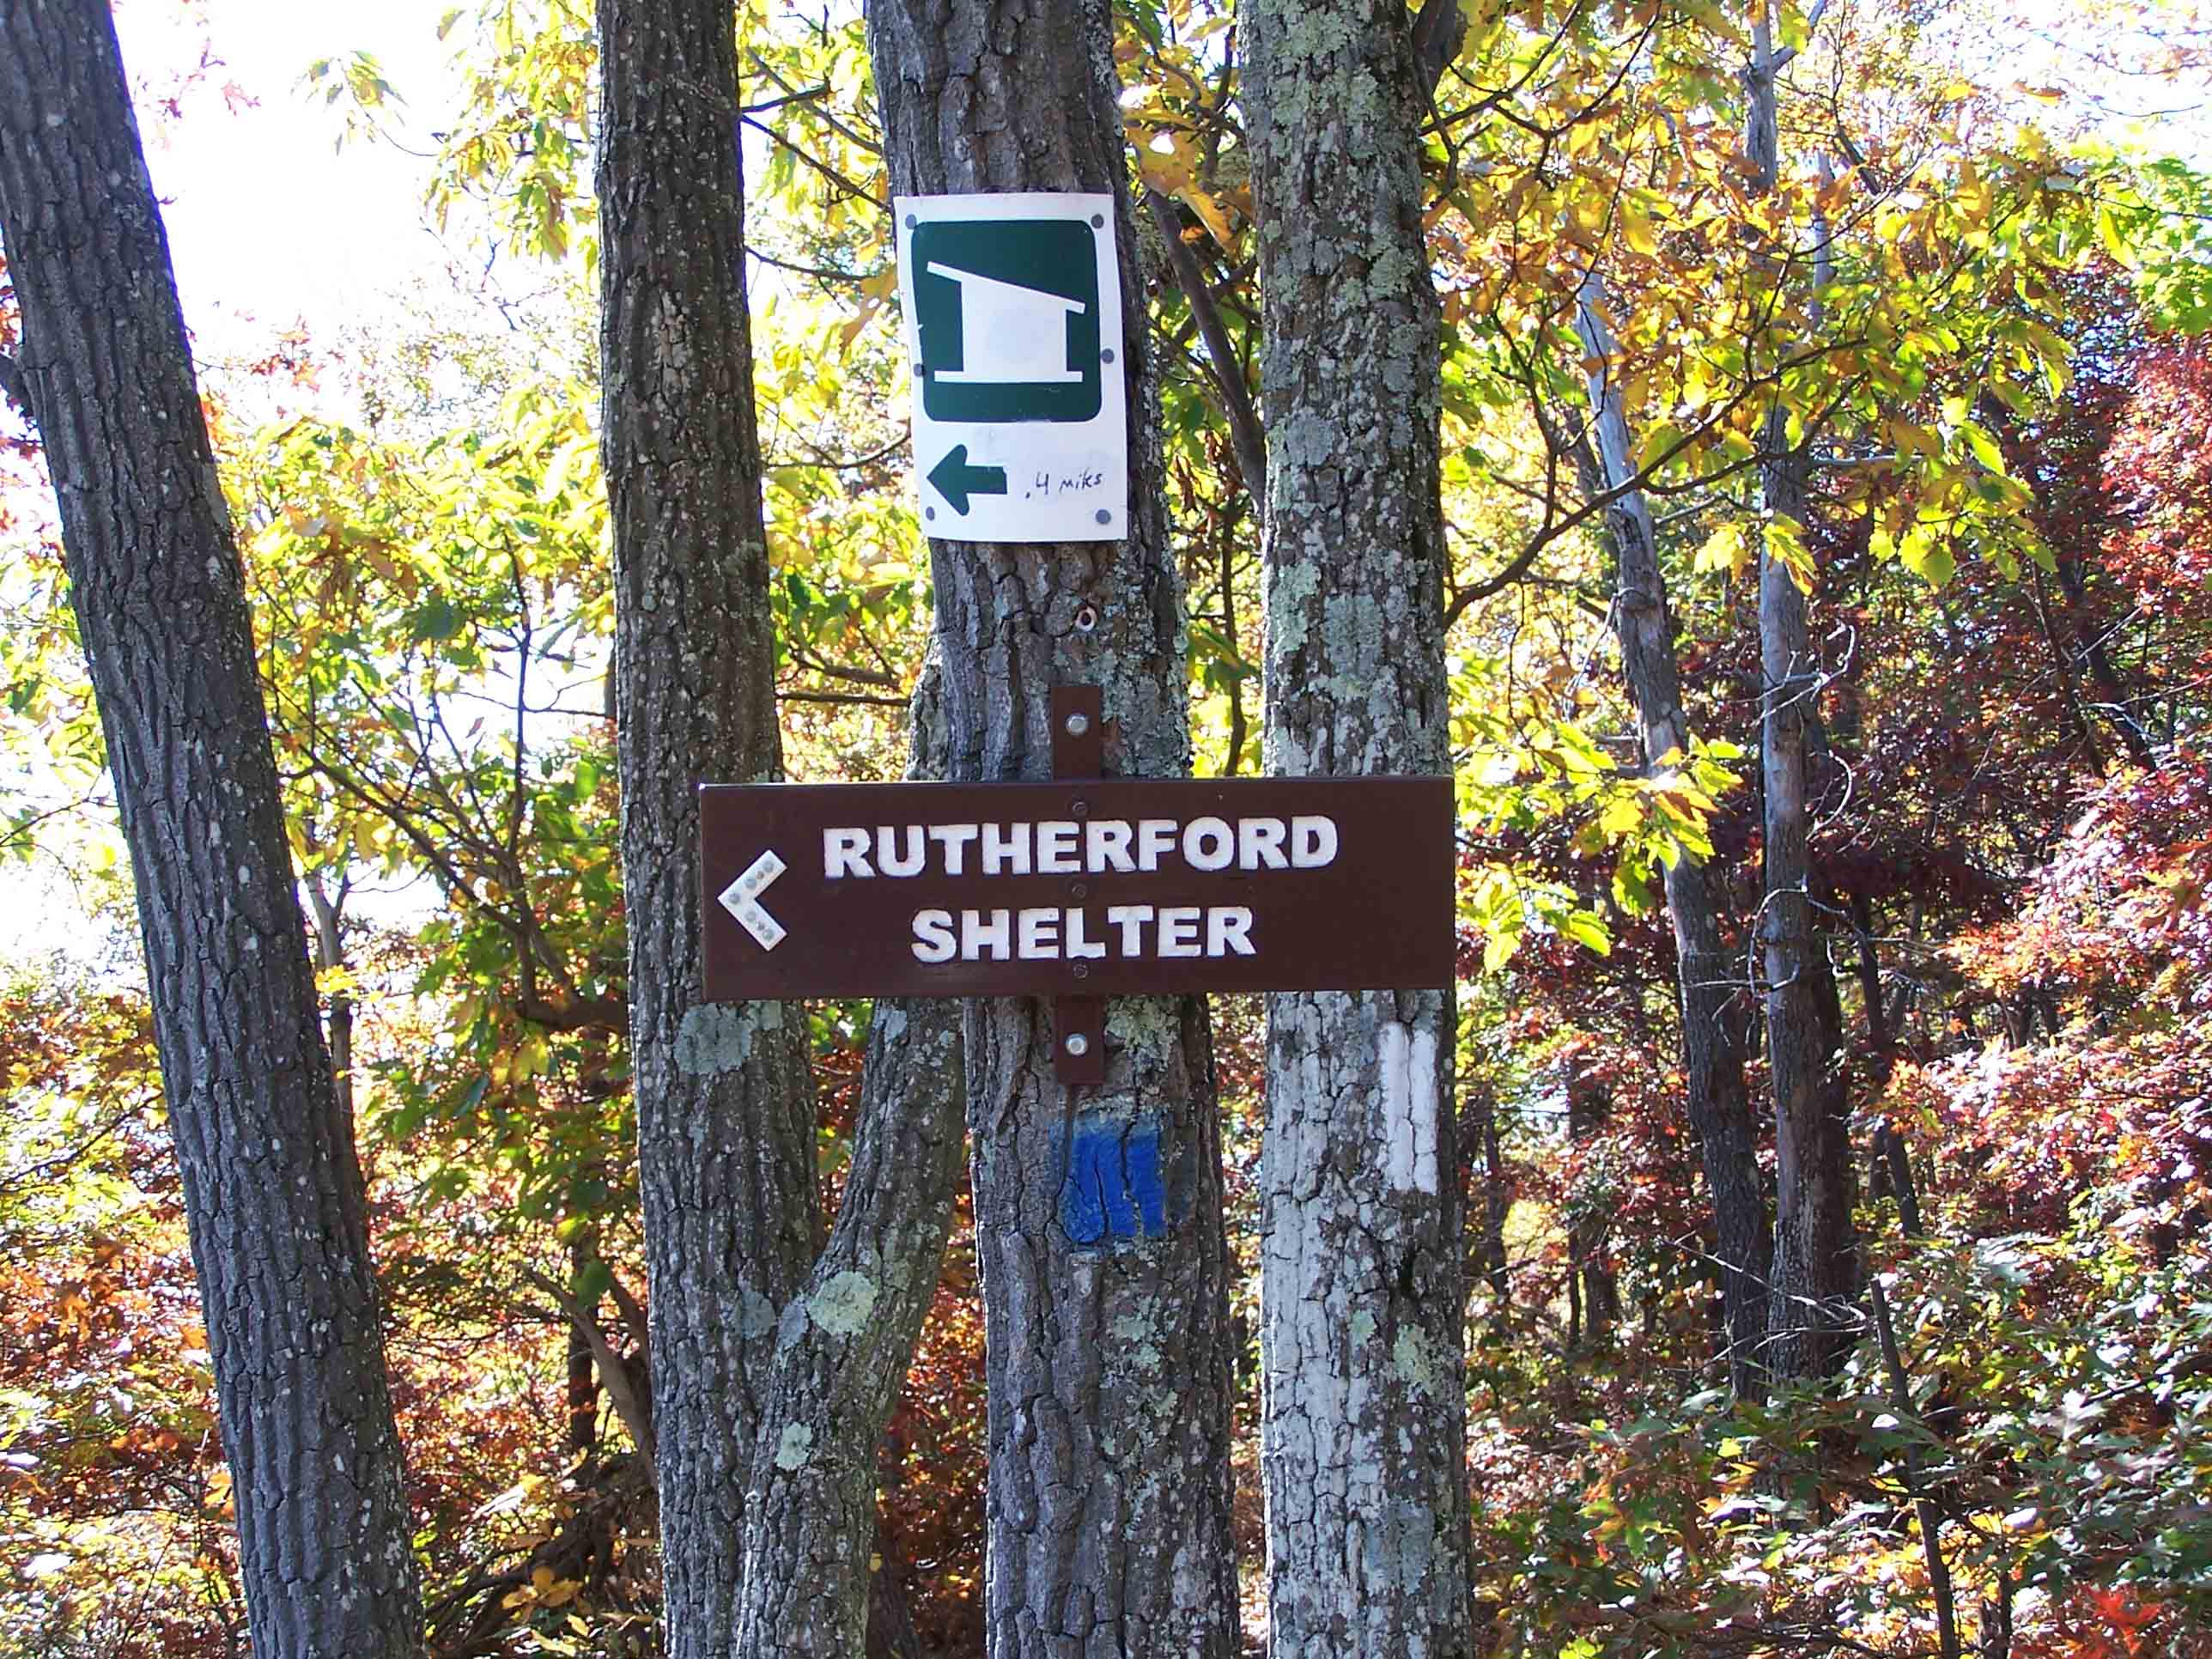 mm 2.6 - Sign for Rutherford Shelter. Courtesy at@rohland.org